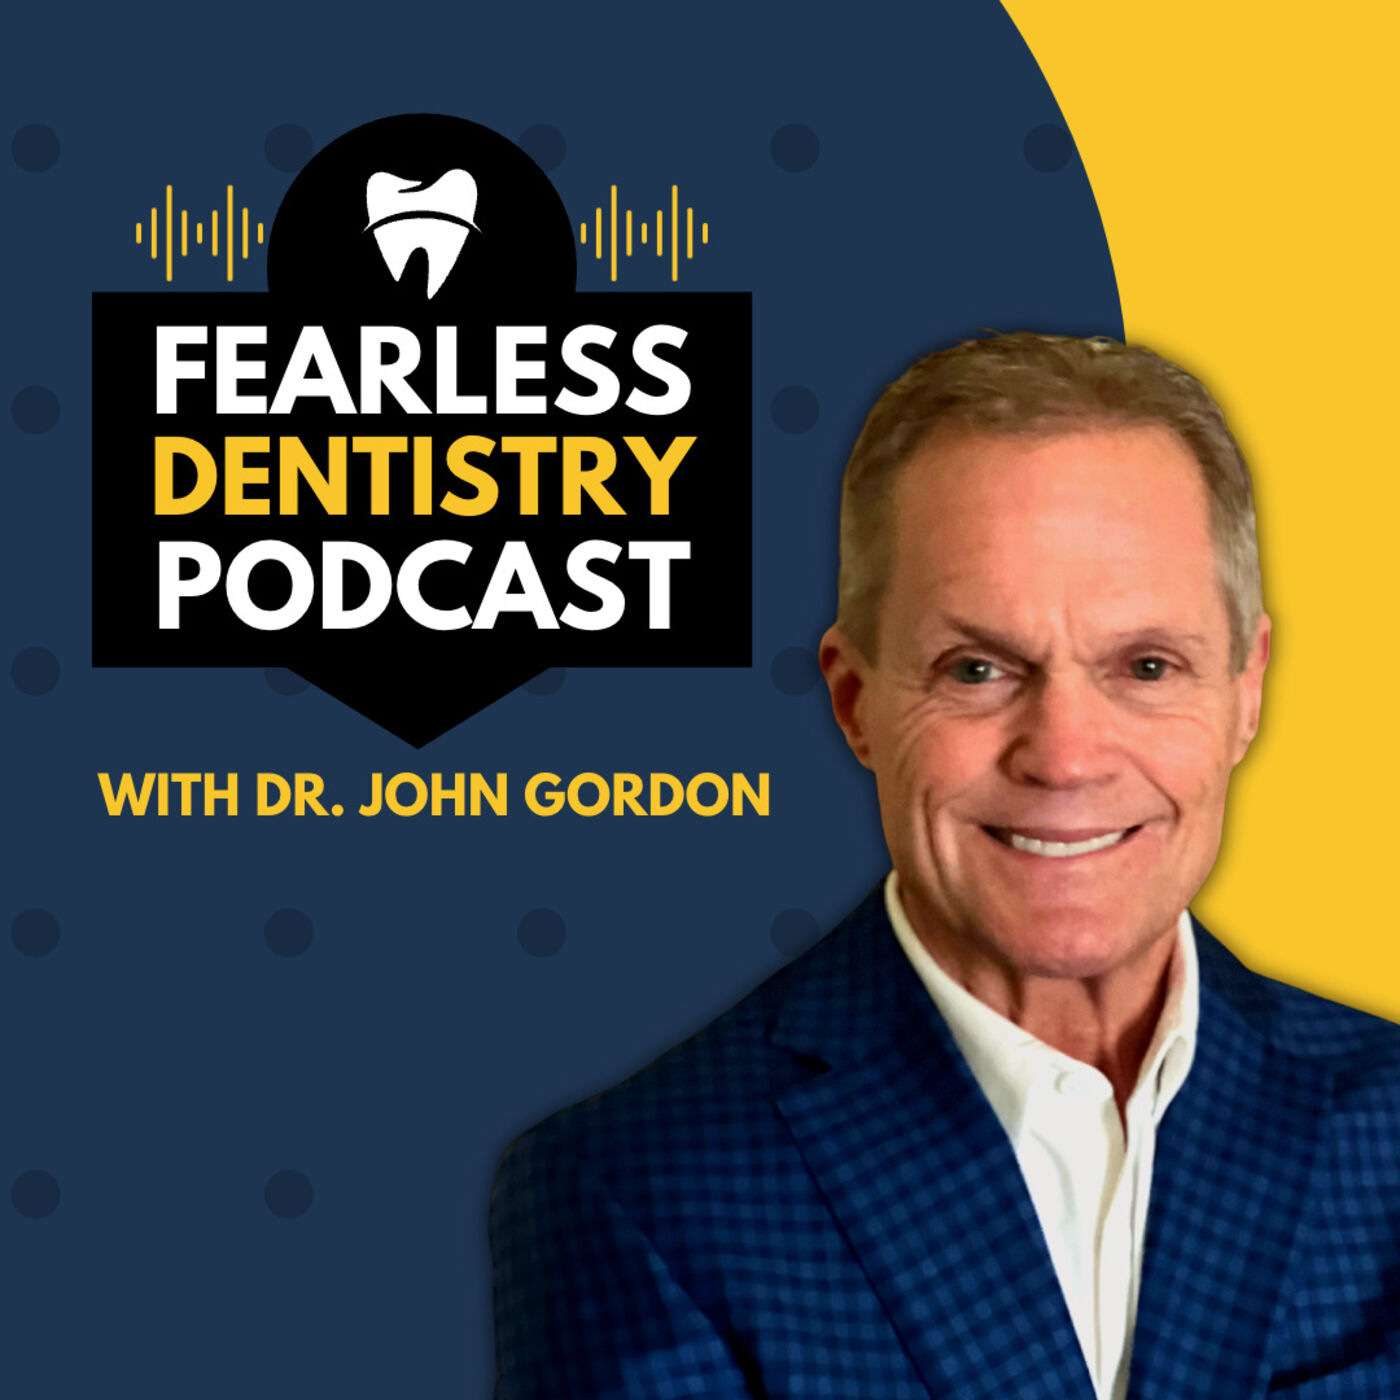 Fearless Dentistry Podcast with Dr. John Gordon